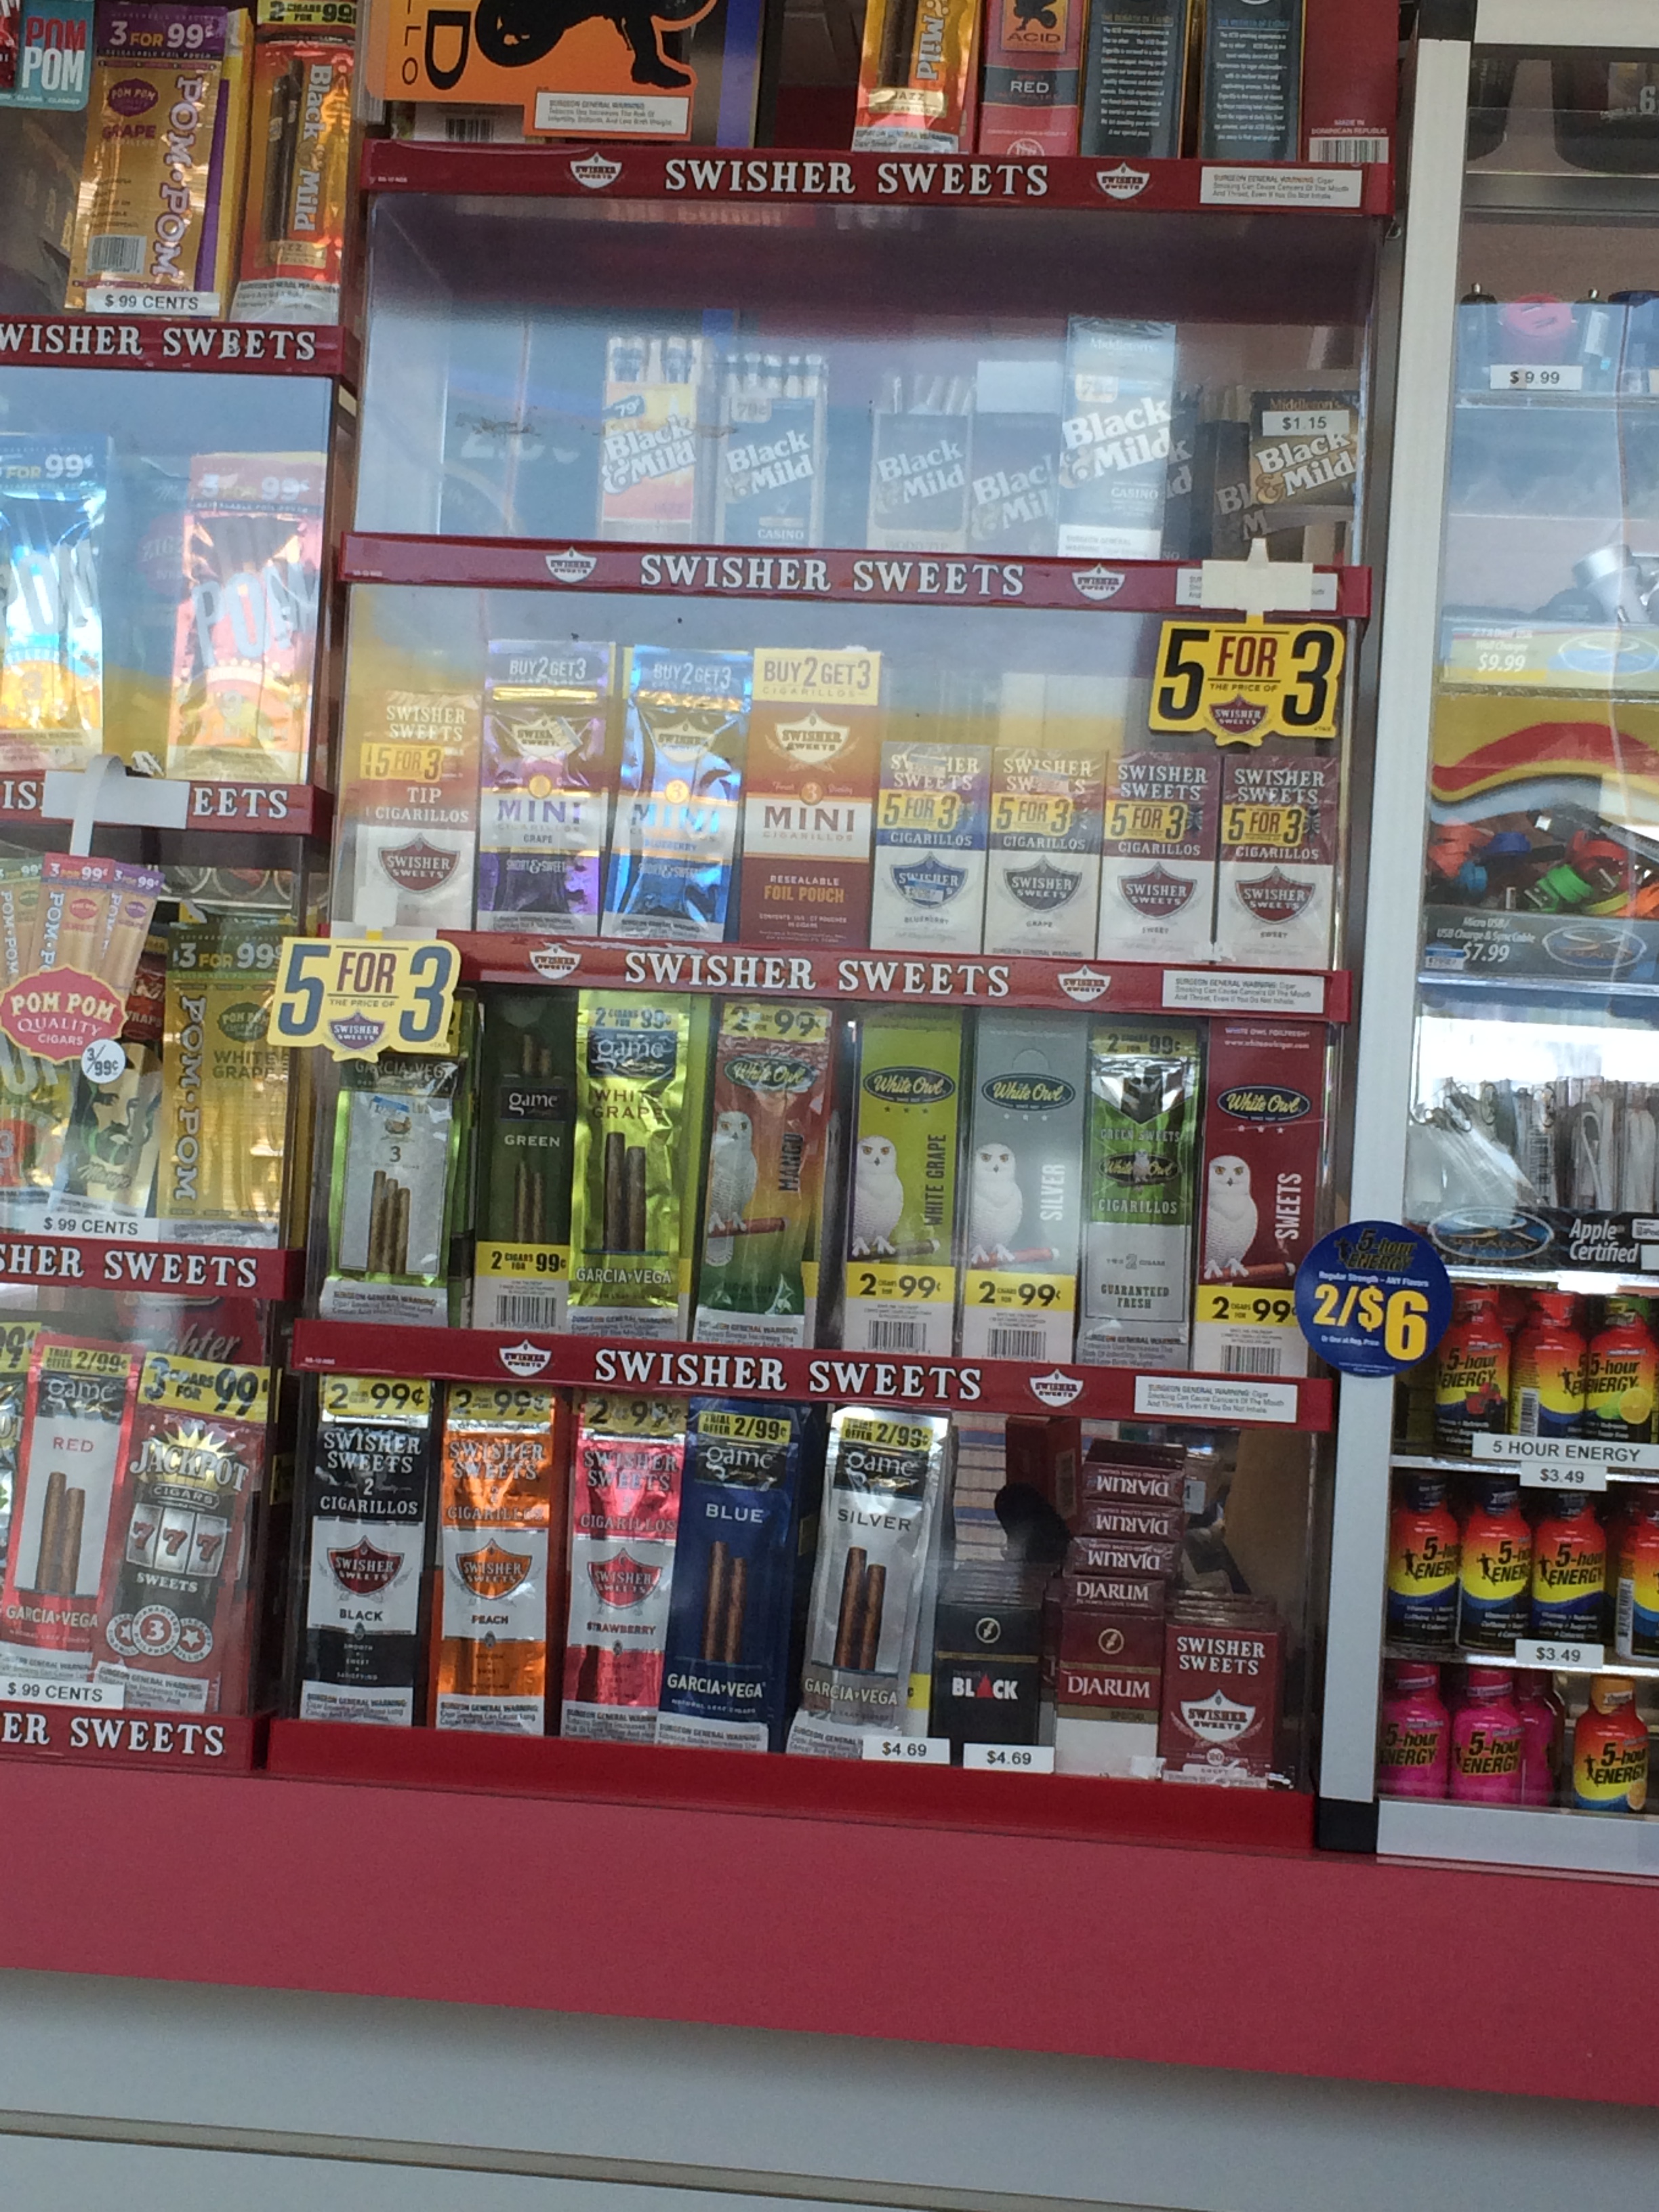 display of little cigars and cigarillos with various flavors, including "concept" flavors 